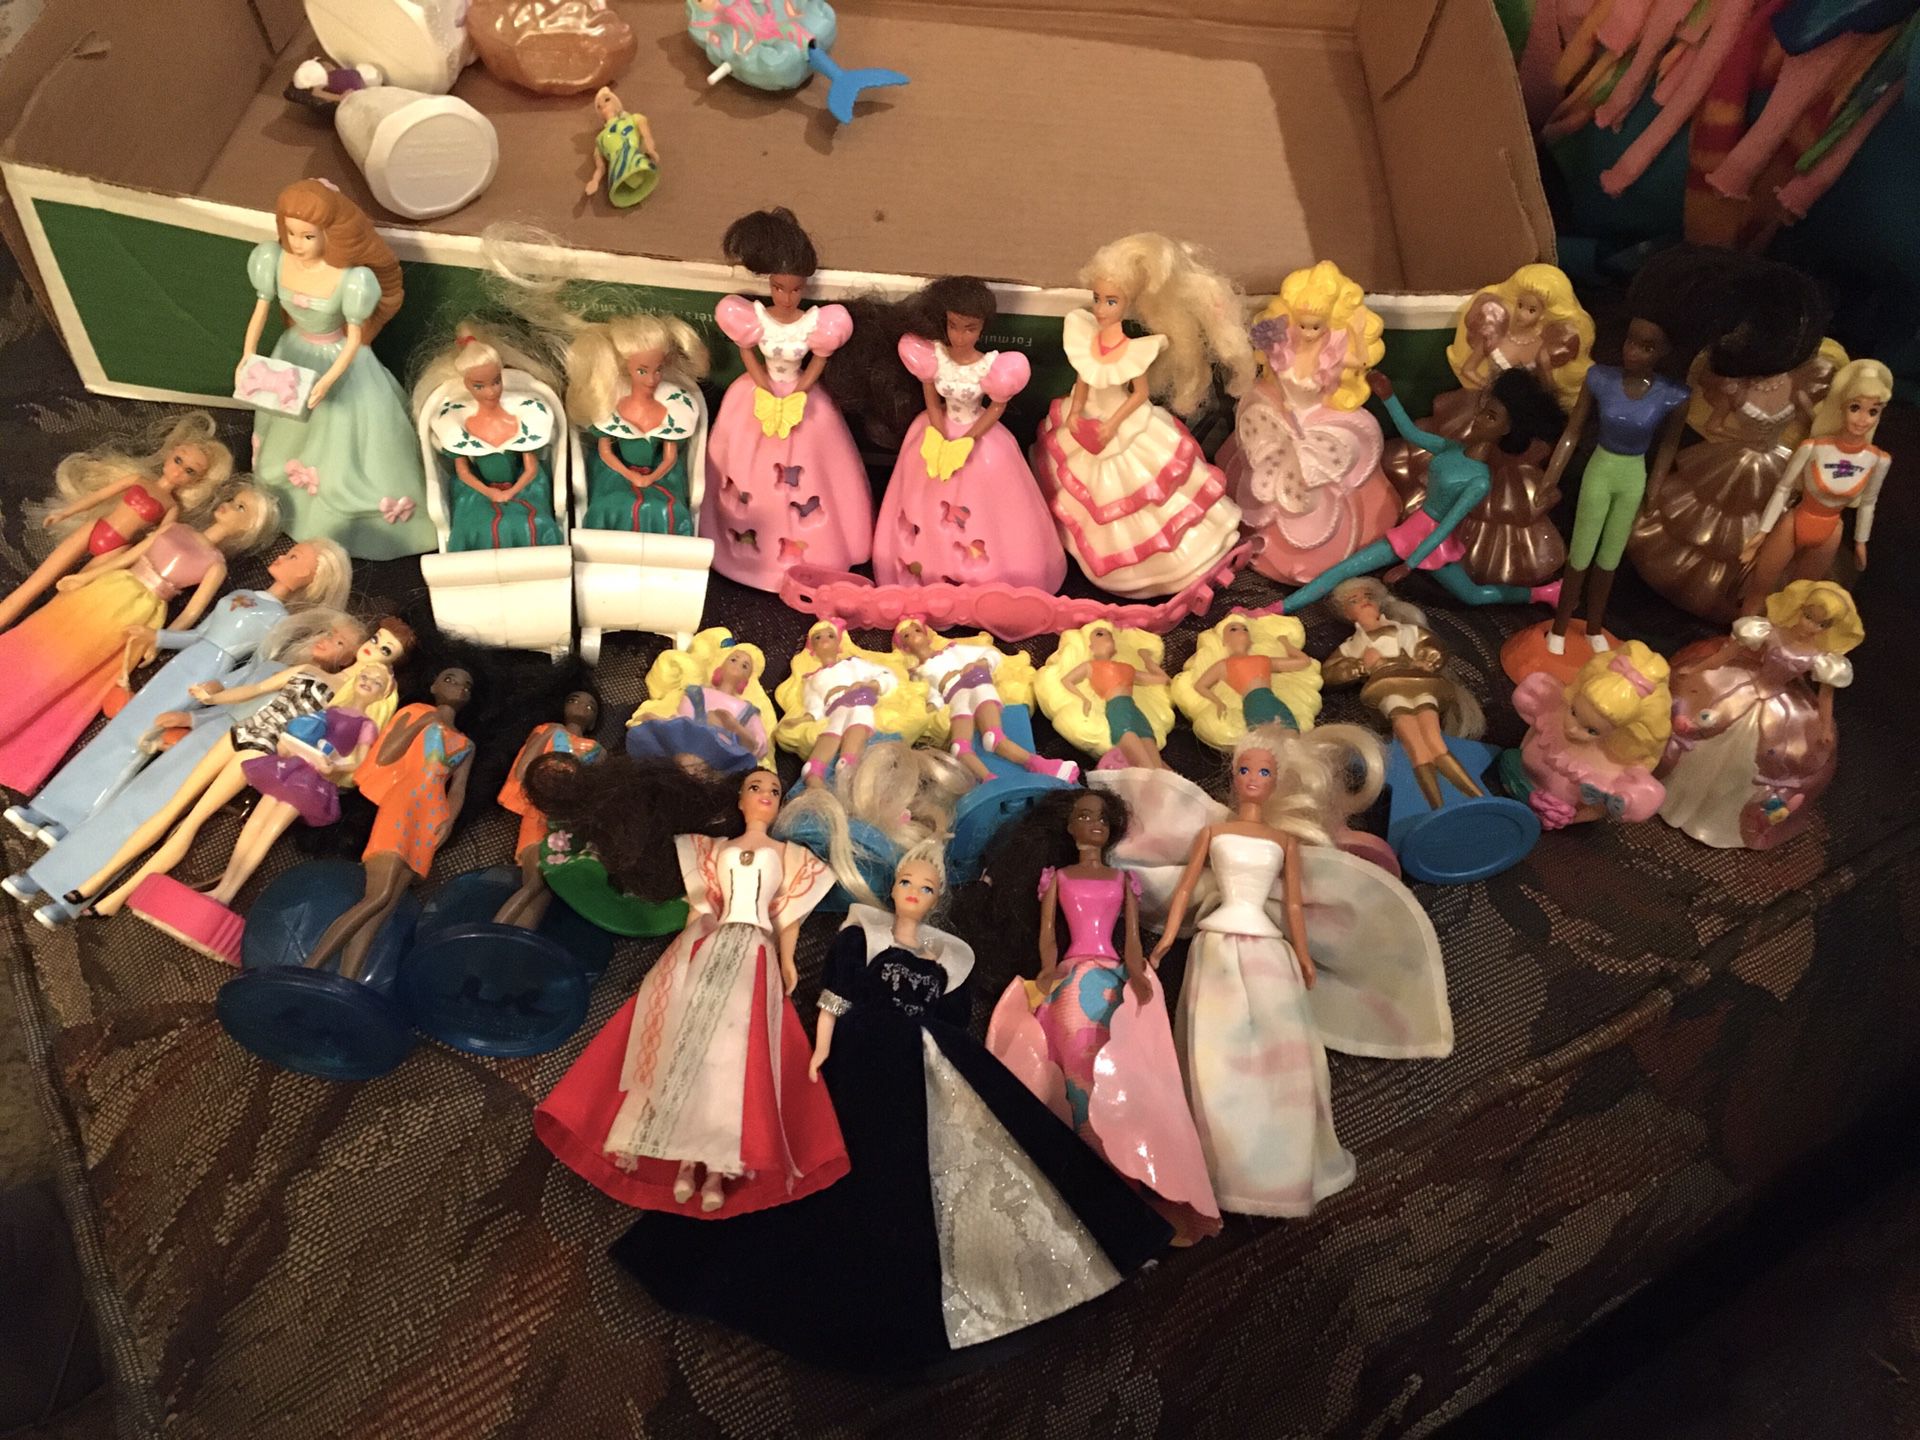 Vintage McDonald’s Happy meal Toys: Barbies, Cabbage patch kids, Mulan’s cricket, toy story B Peep and others